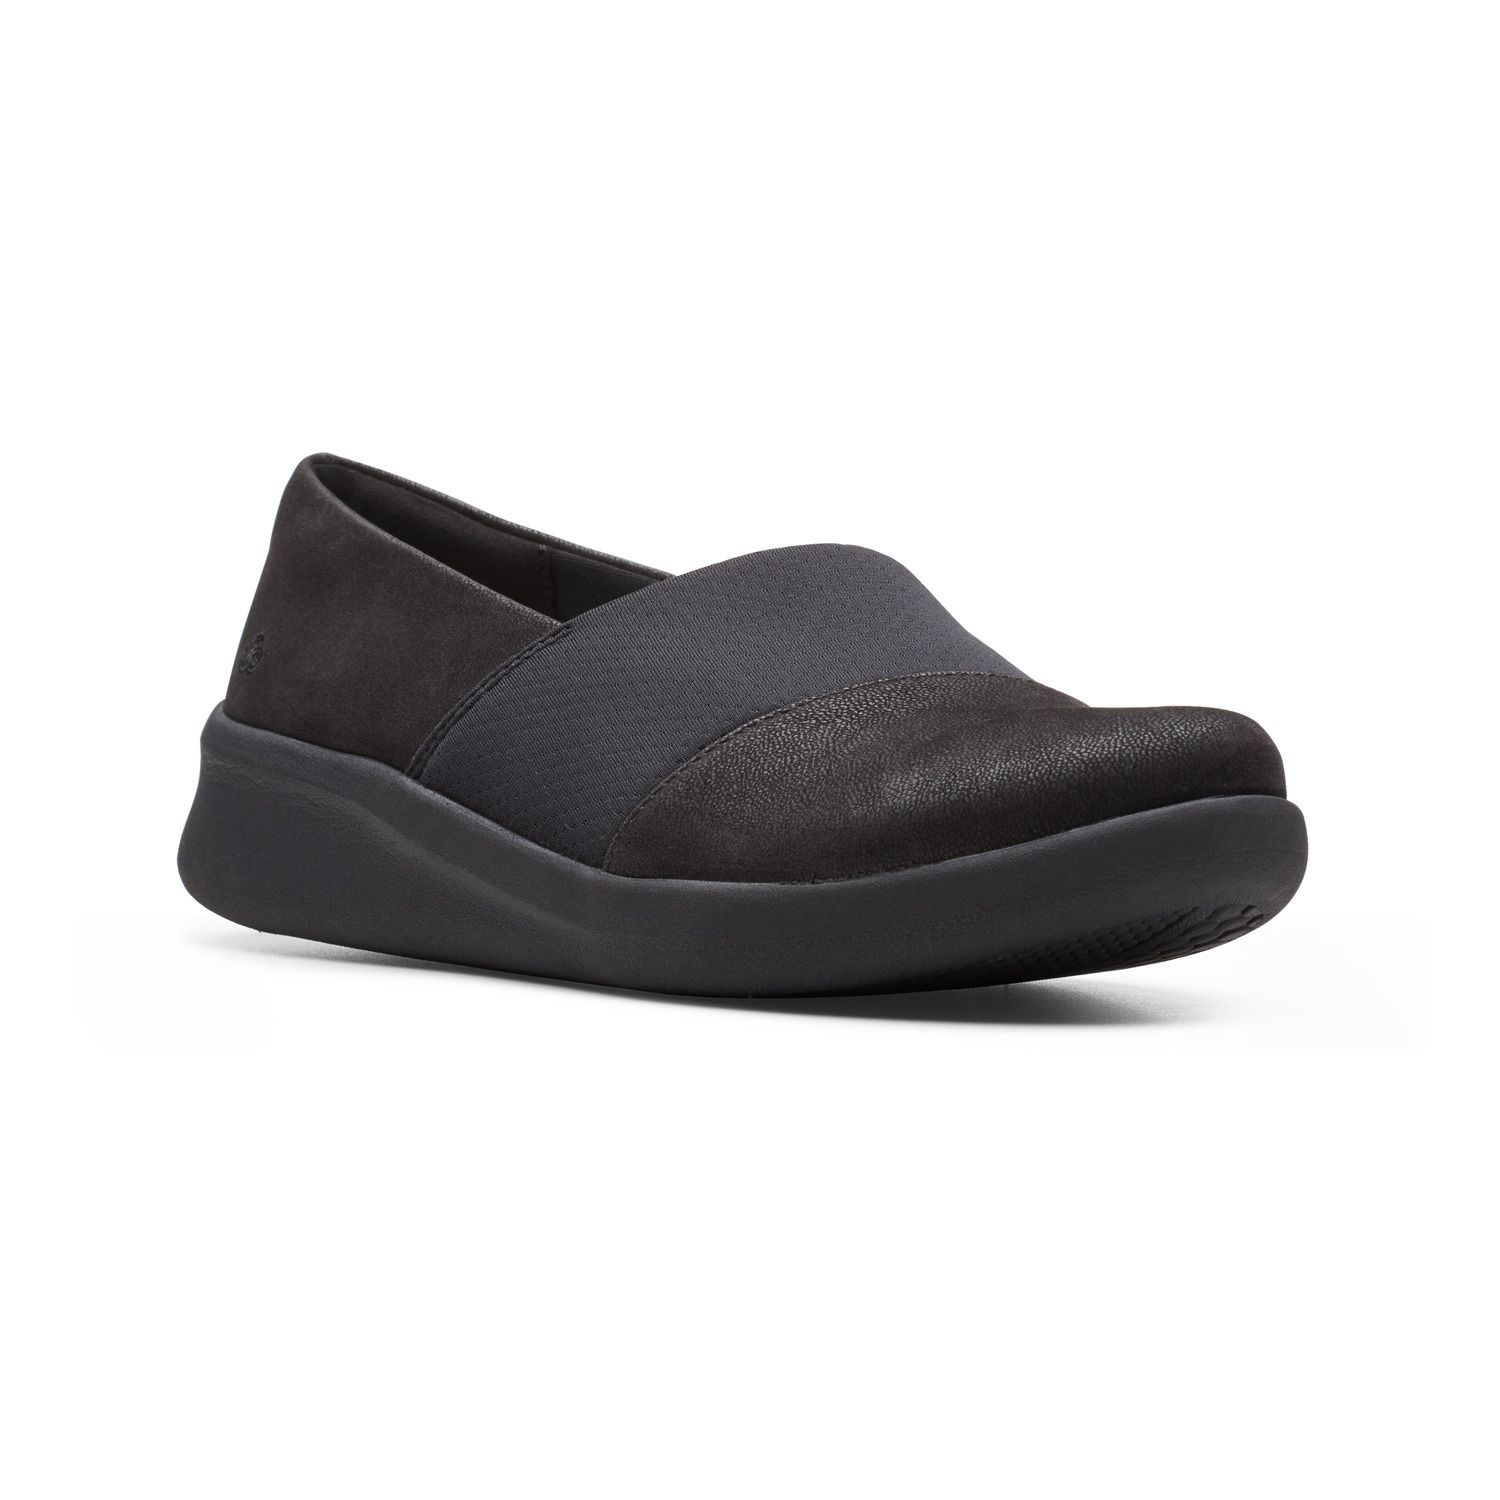 clarks cloudsteppers slip on shoes